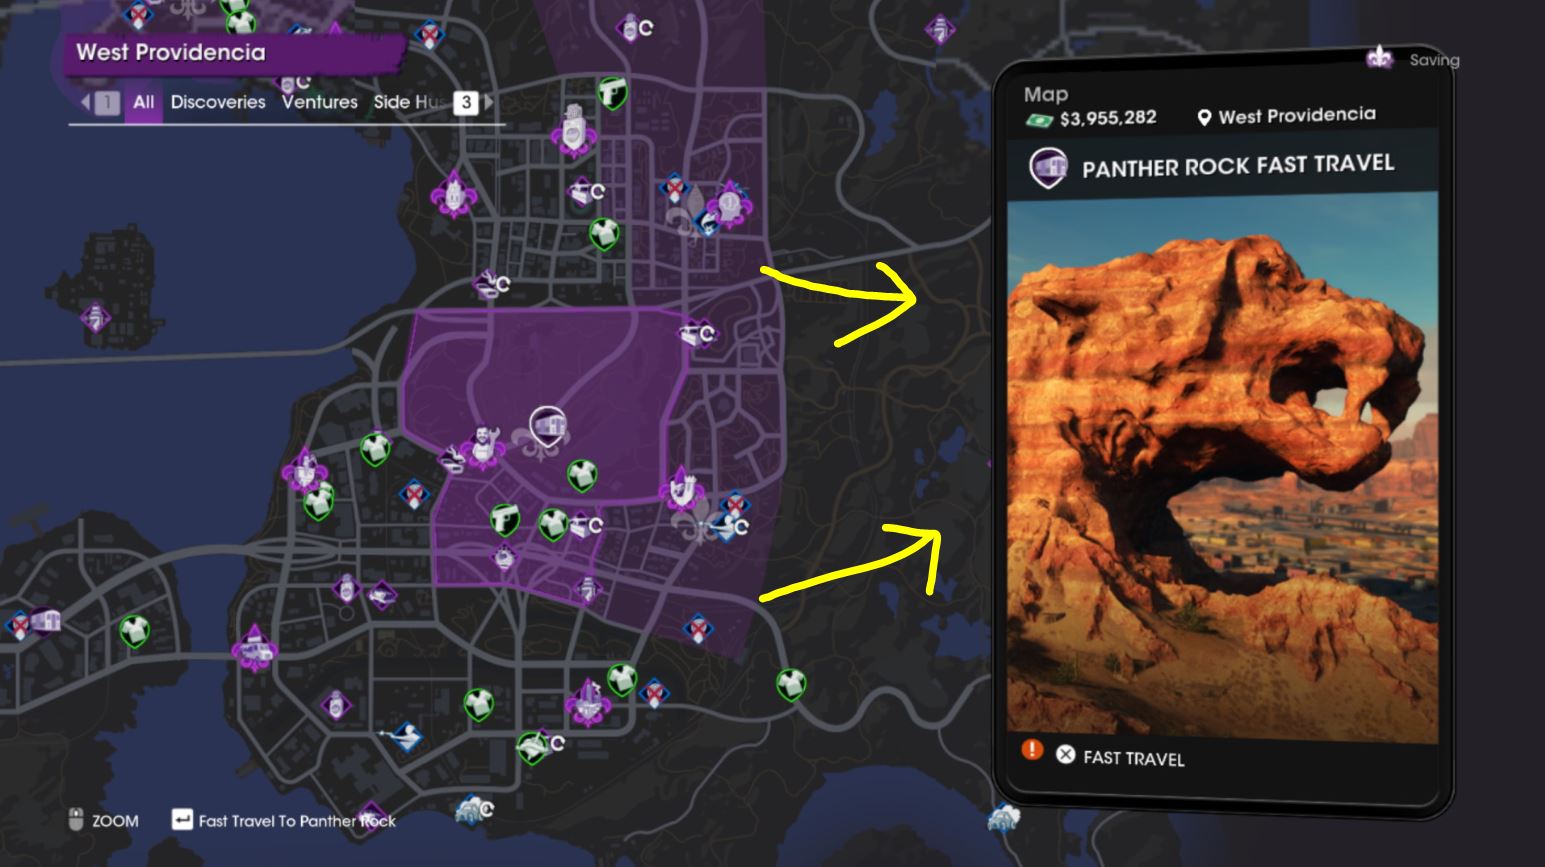 SAints Row 2022 game reboot Panther Rock fast travel on map location